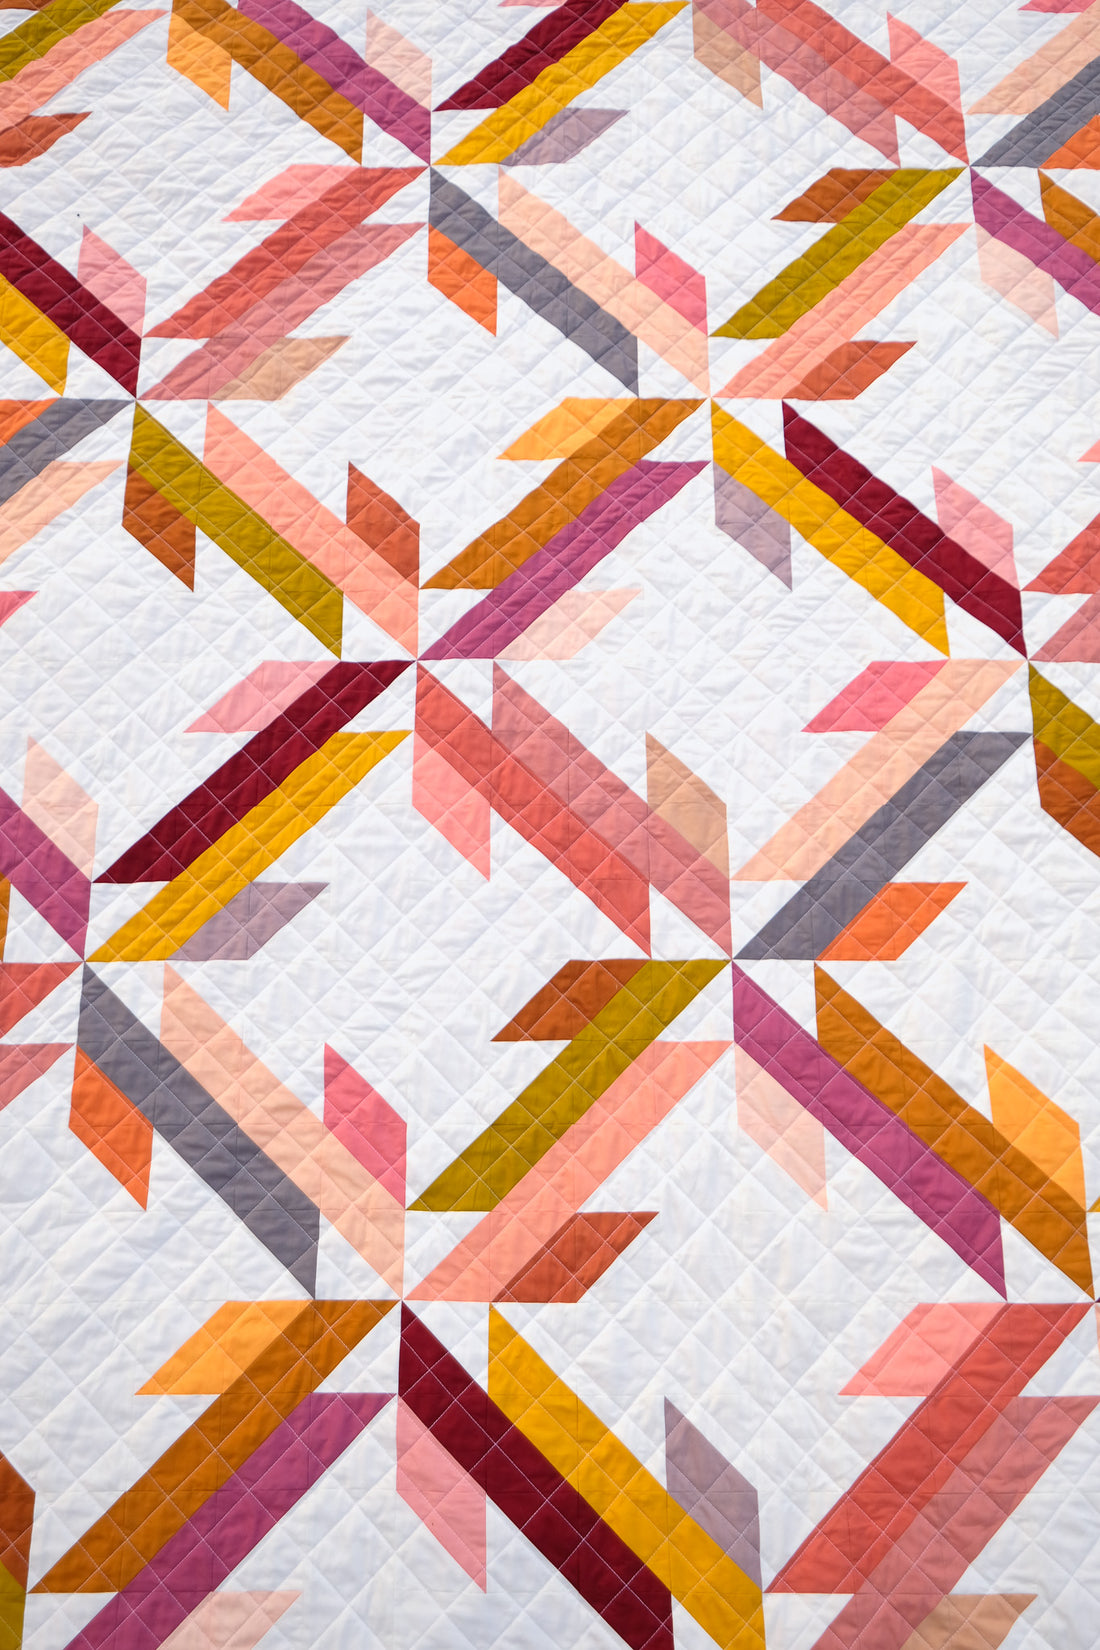 The Carly Quilt PDF Pattern